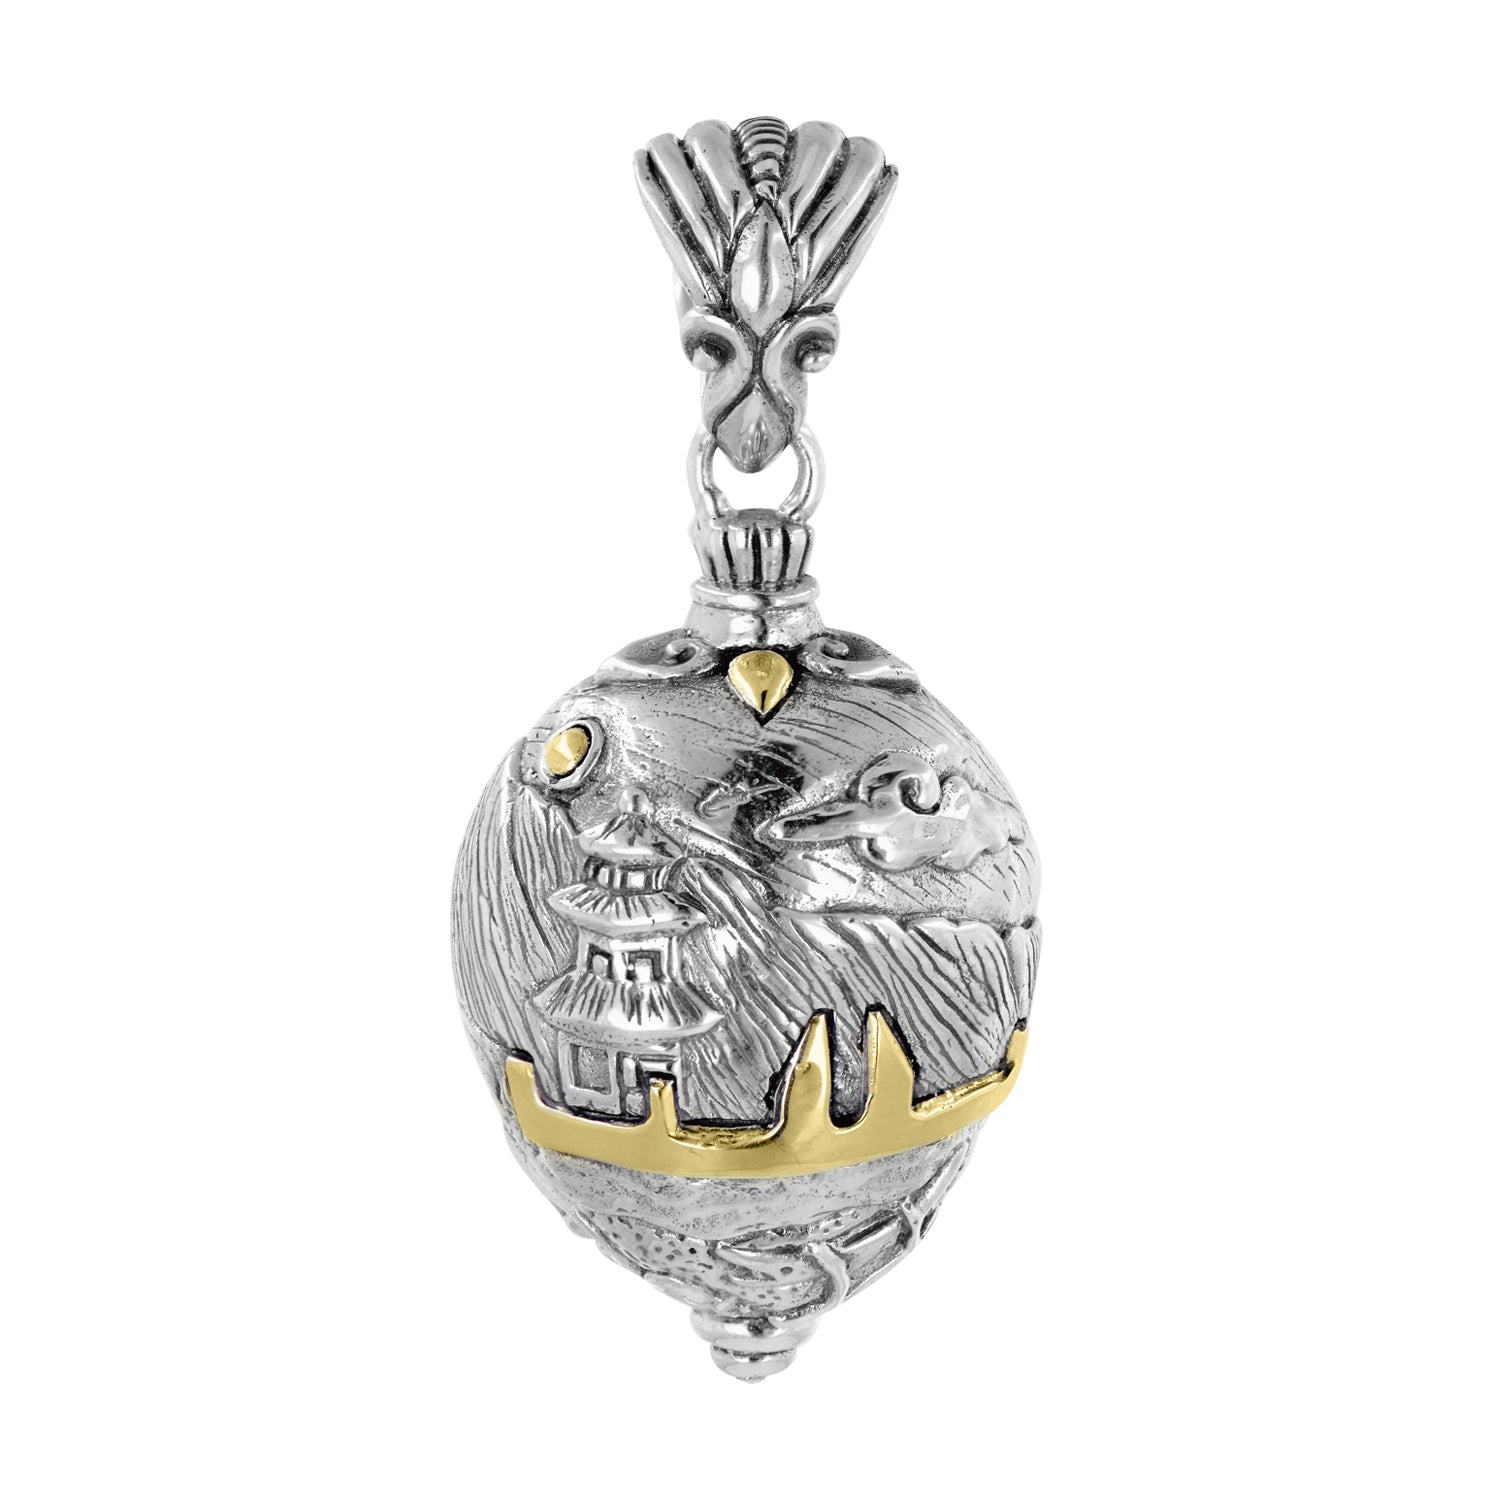 Bali Sterling Silver Ulun Danu Temple Amulet Pendant with 18K Gold Accents